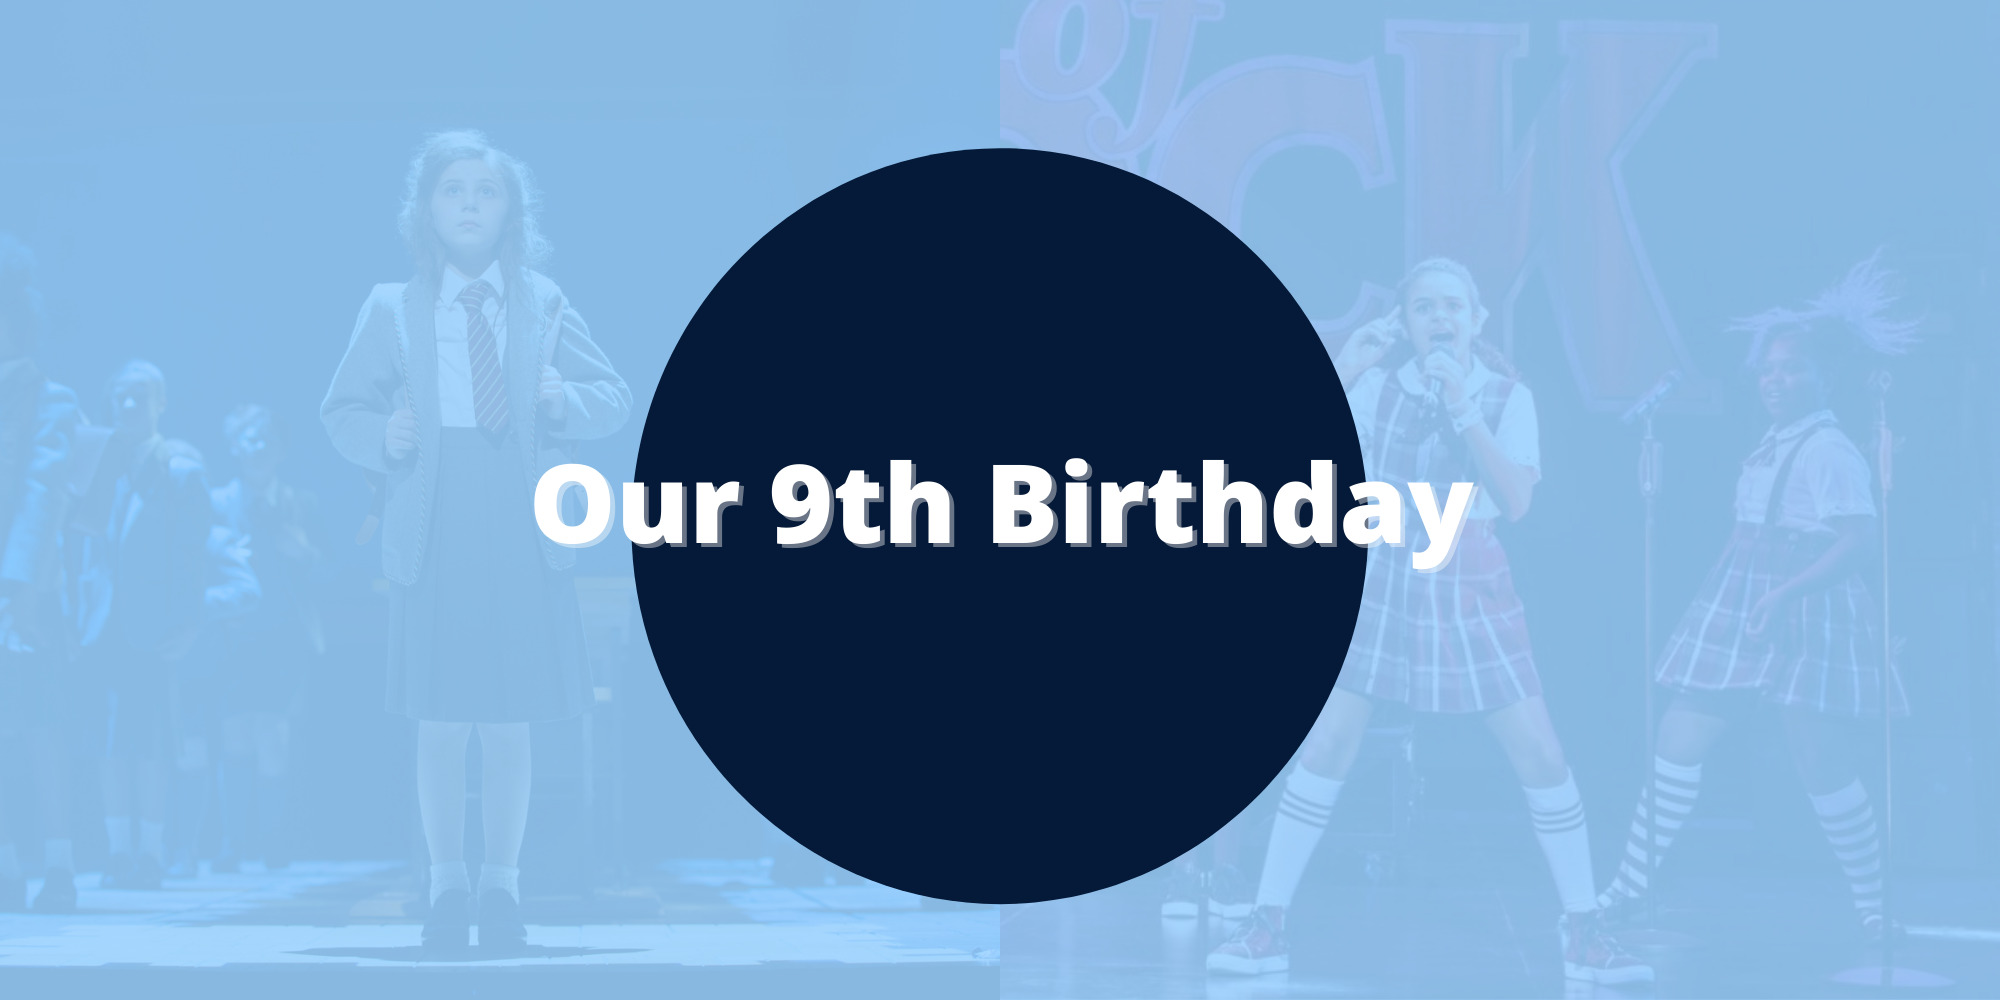 KOT Celebrates 9th Birthday, Happy Trails to A Christmas Story, and more!